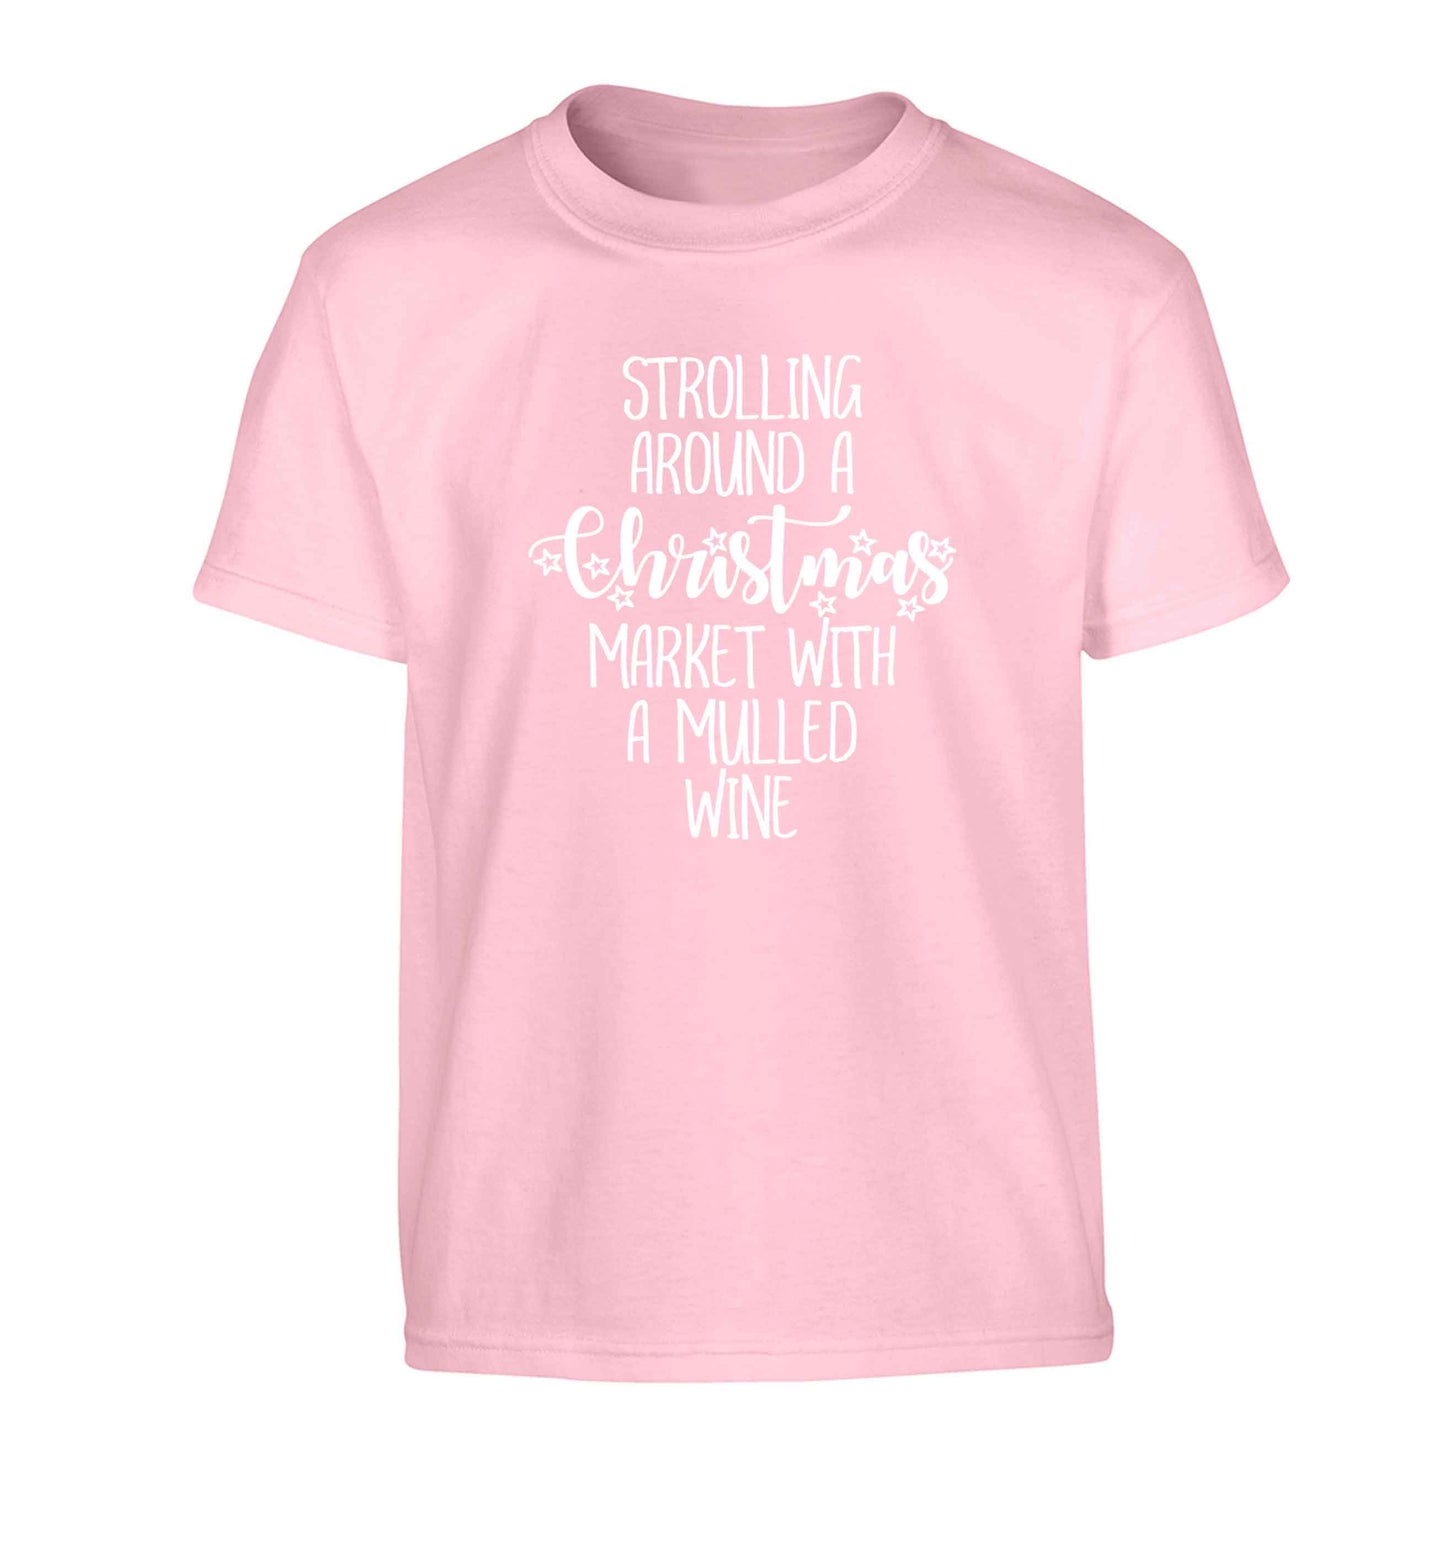 Strolling around a Christmas market with mulled wine Children's light pink Tshirt 12-13 Years